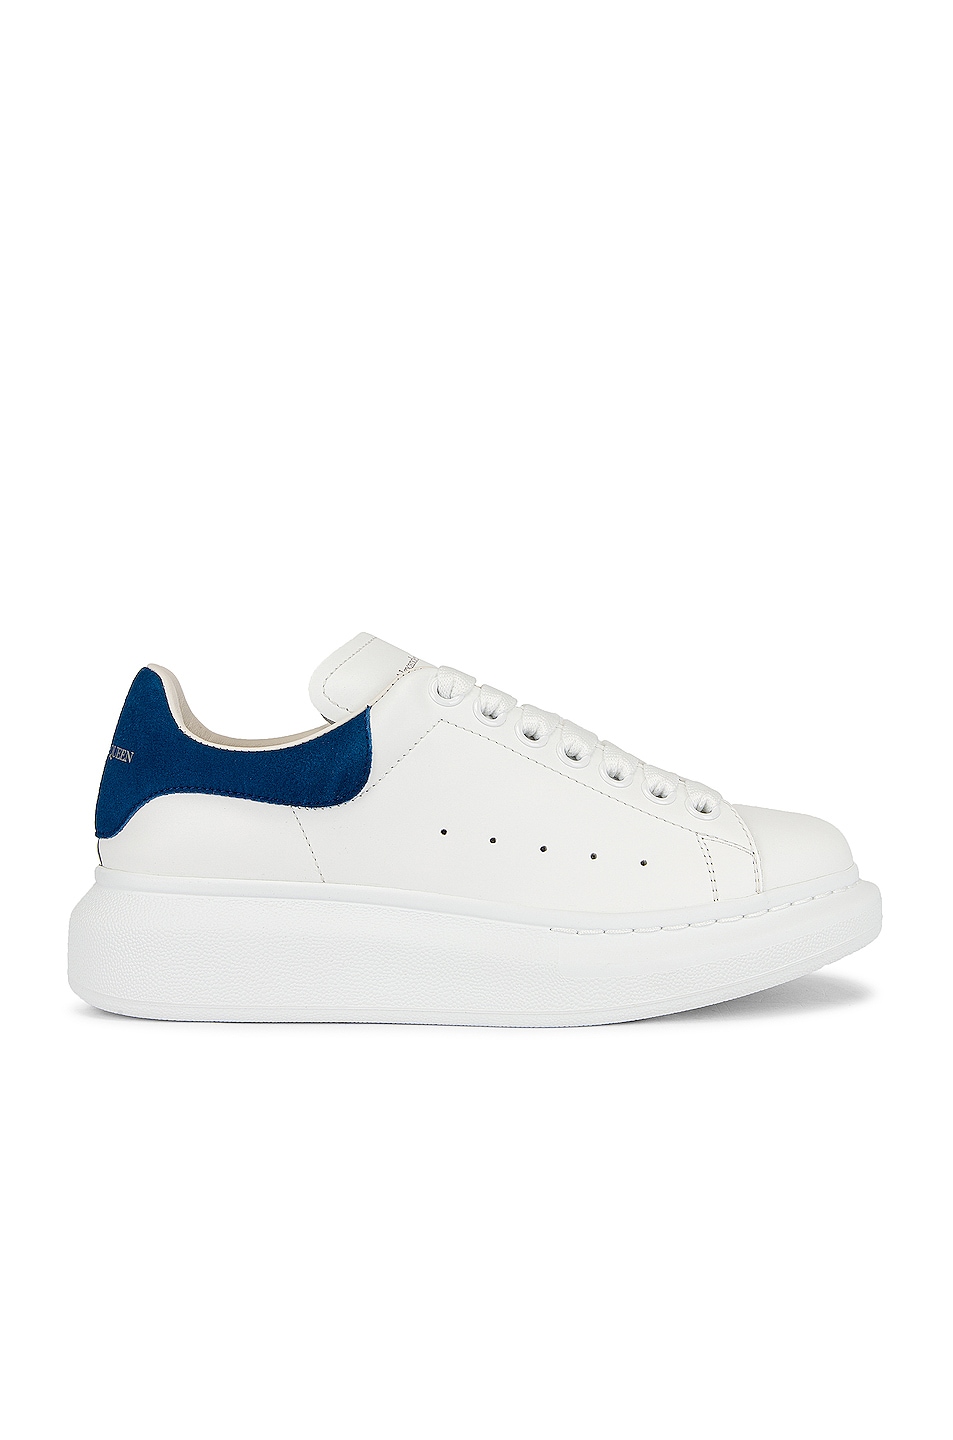 Image 1 of Alexander McQueen Lace Up Sneakers in White & Paris Blue